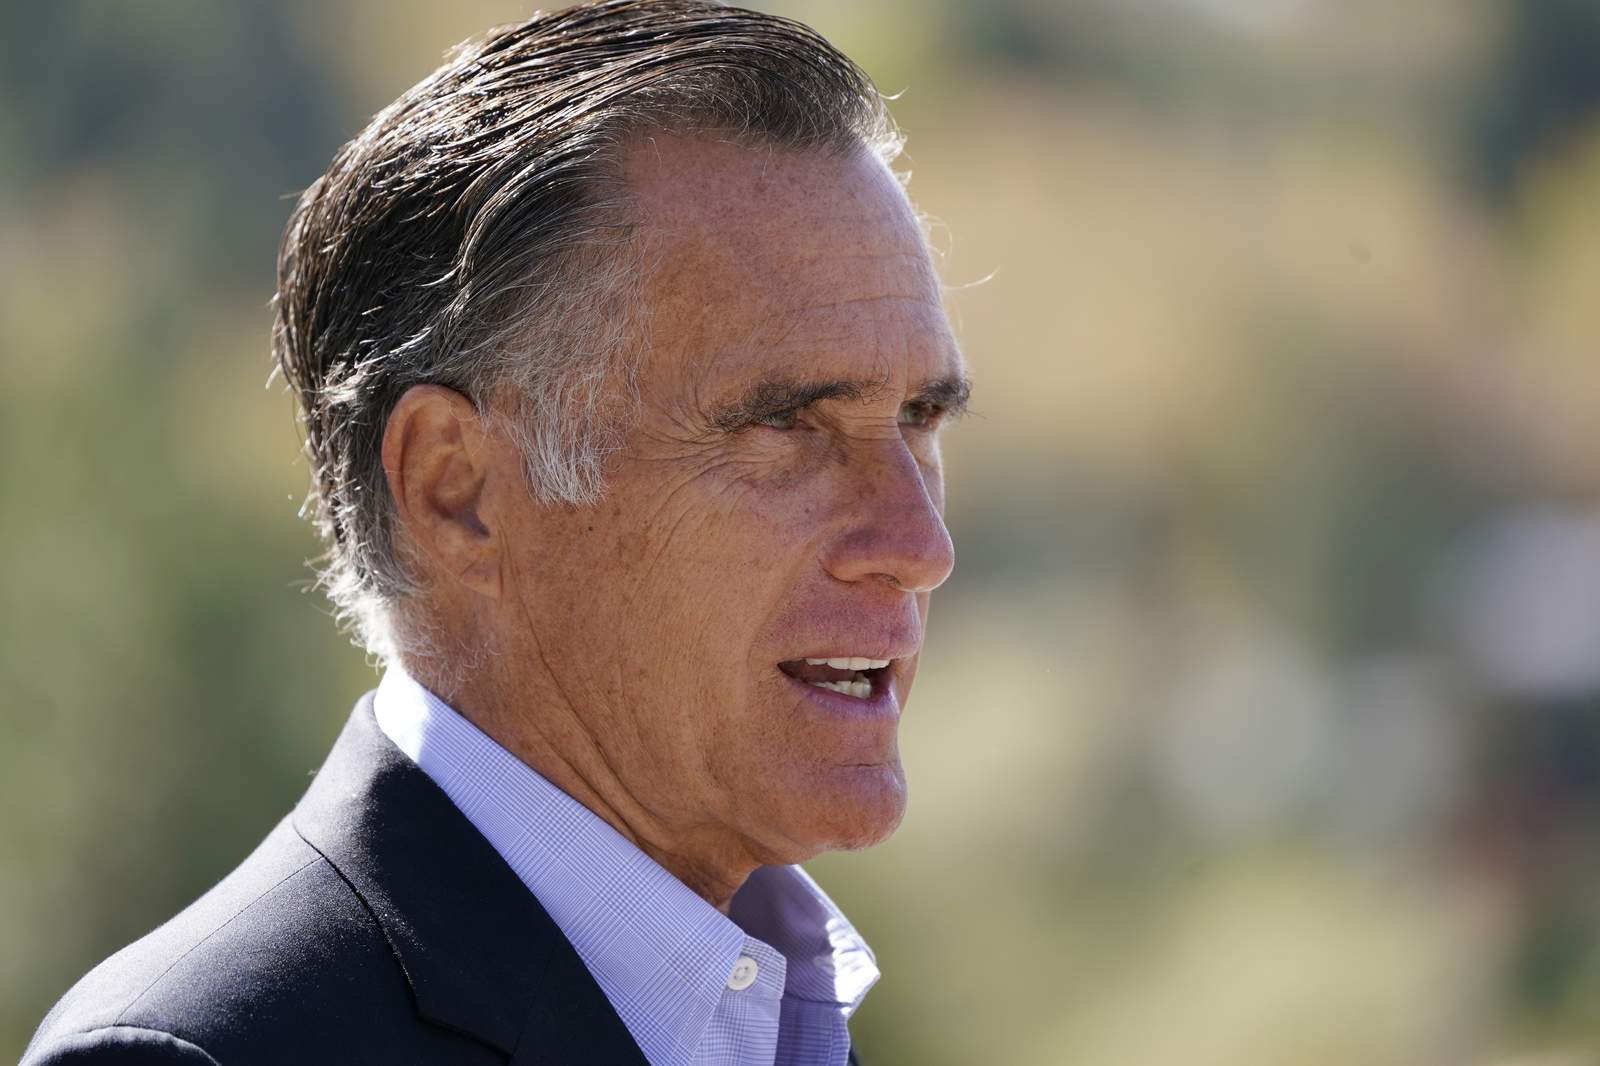 Romney: Trump's election fraud claim wrong, 'reckless'